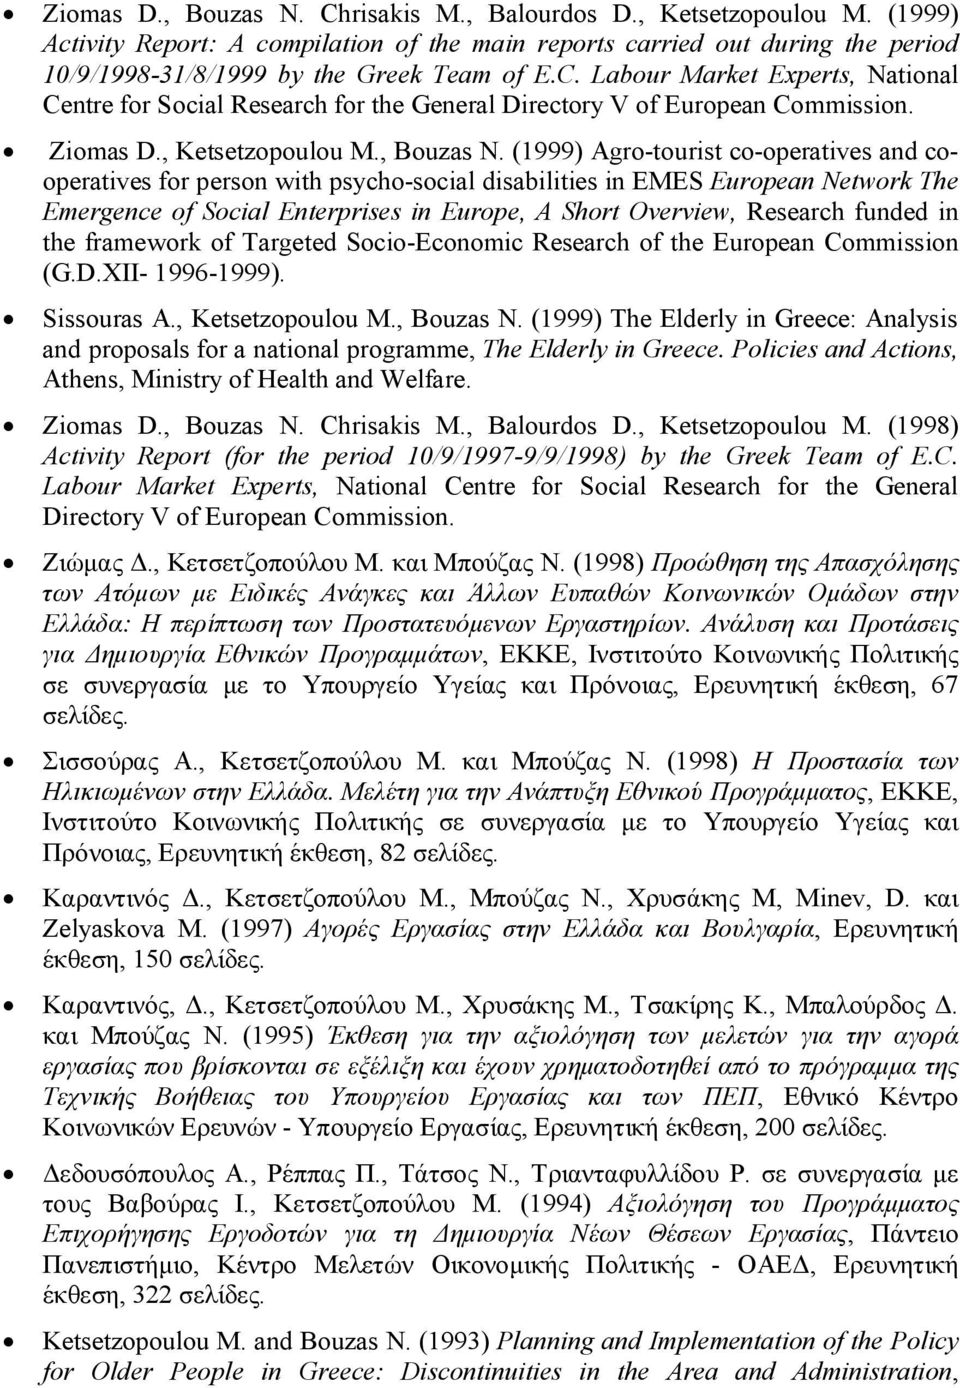 (1999) Agro-tourist co-operatives and cooperatives for person with psycho-social disabilities in EMES European Network The Emergence of Social Enterprises in Europe, A Short Overview, Research funded